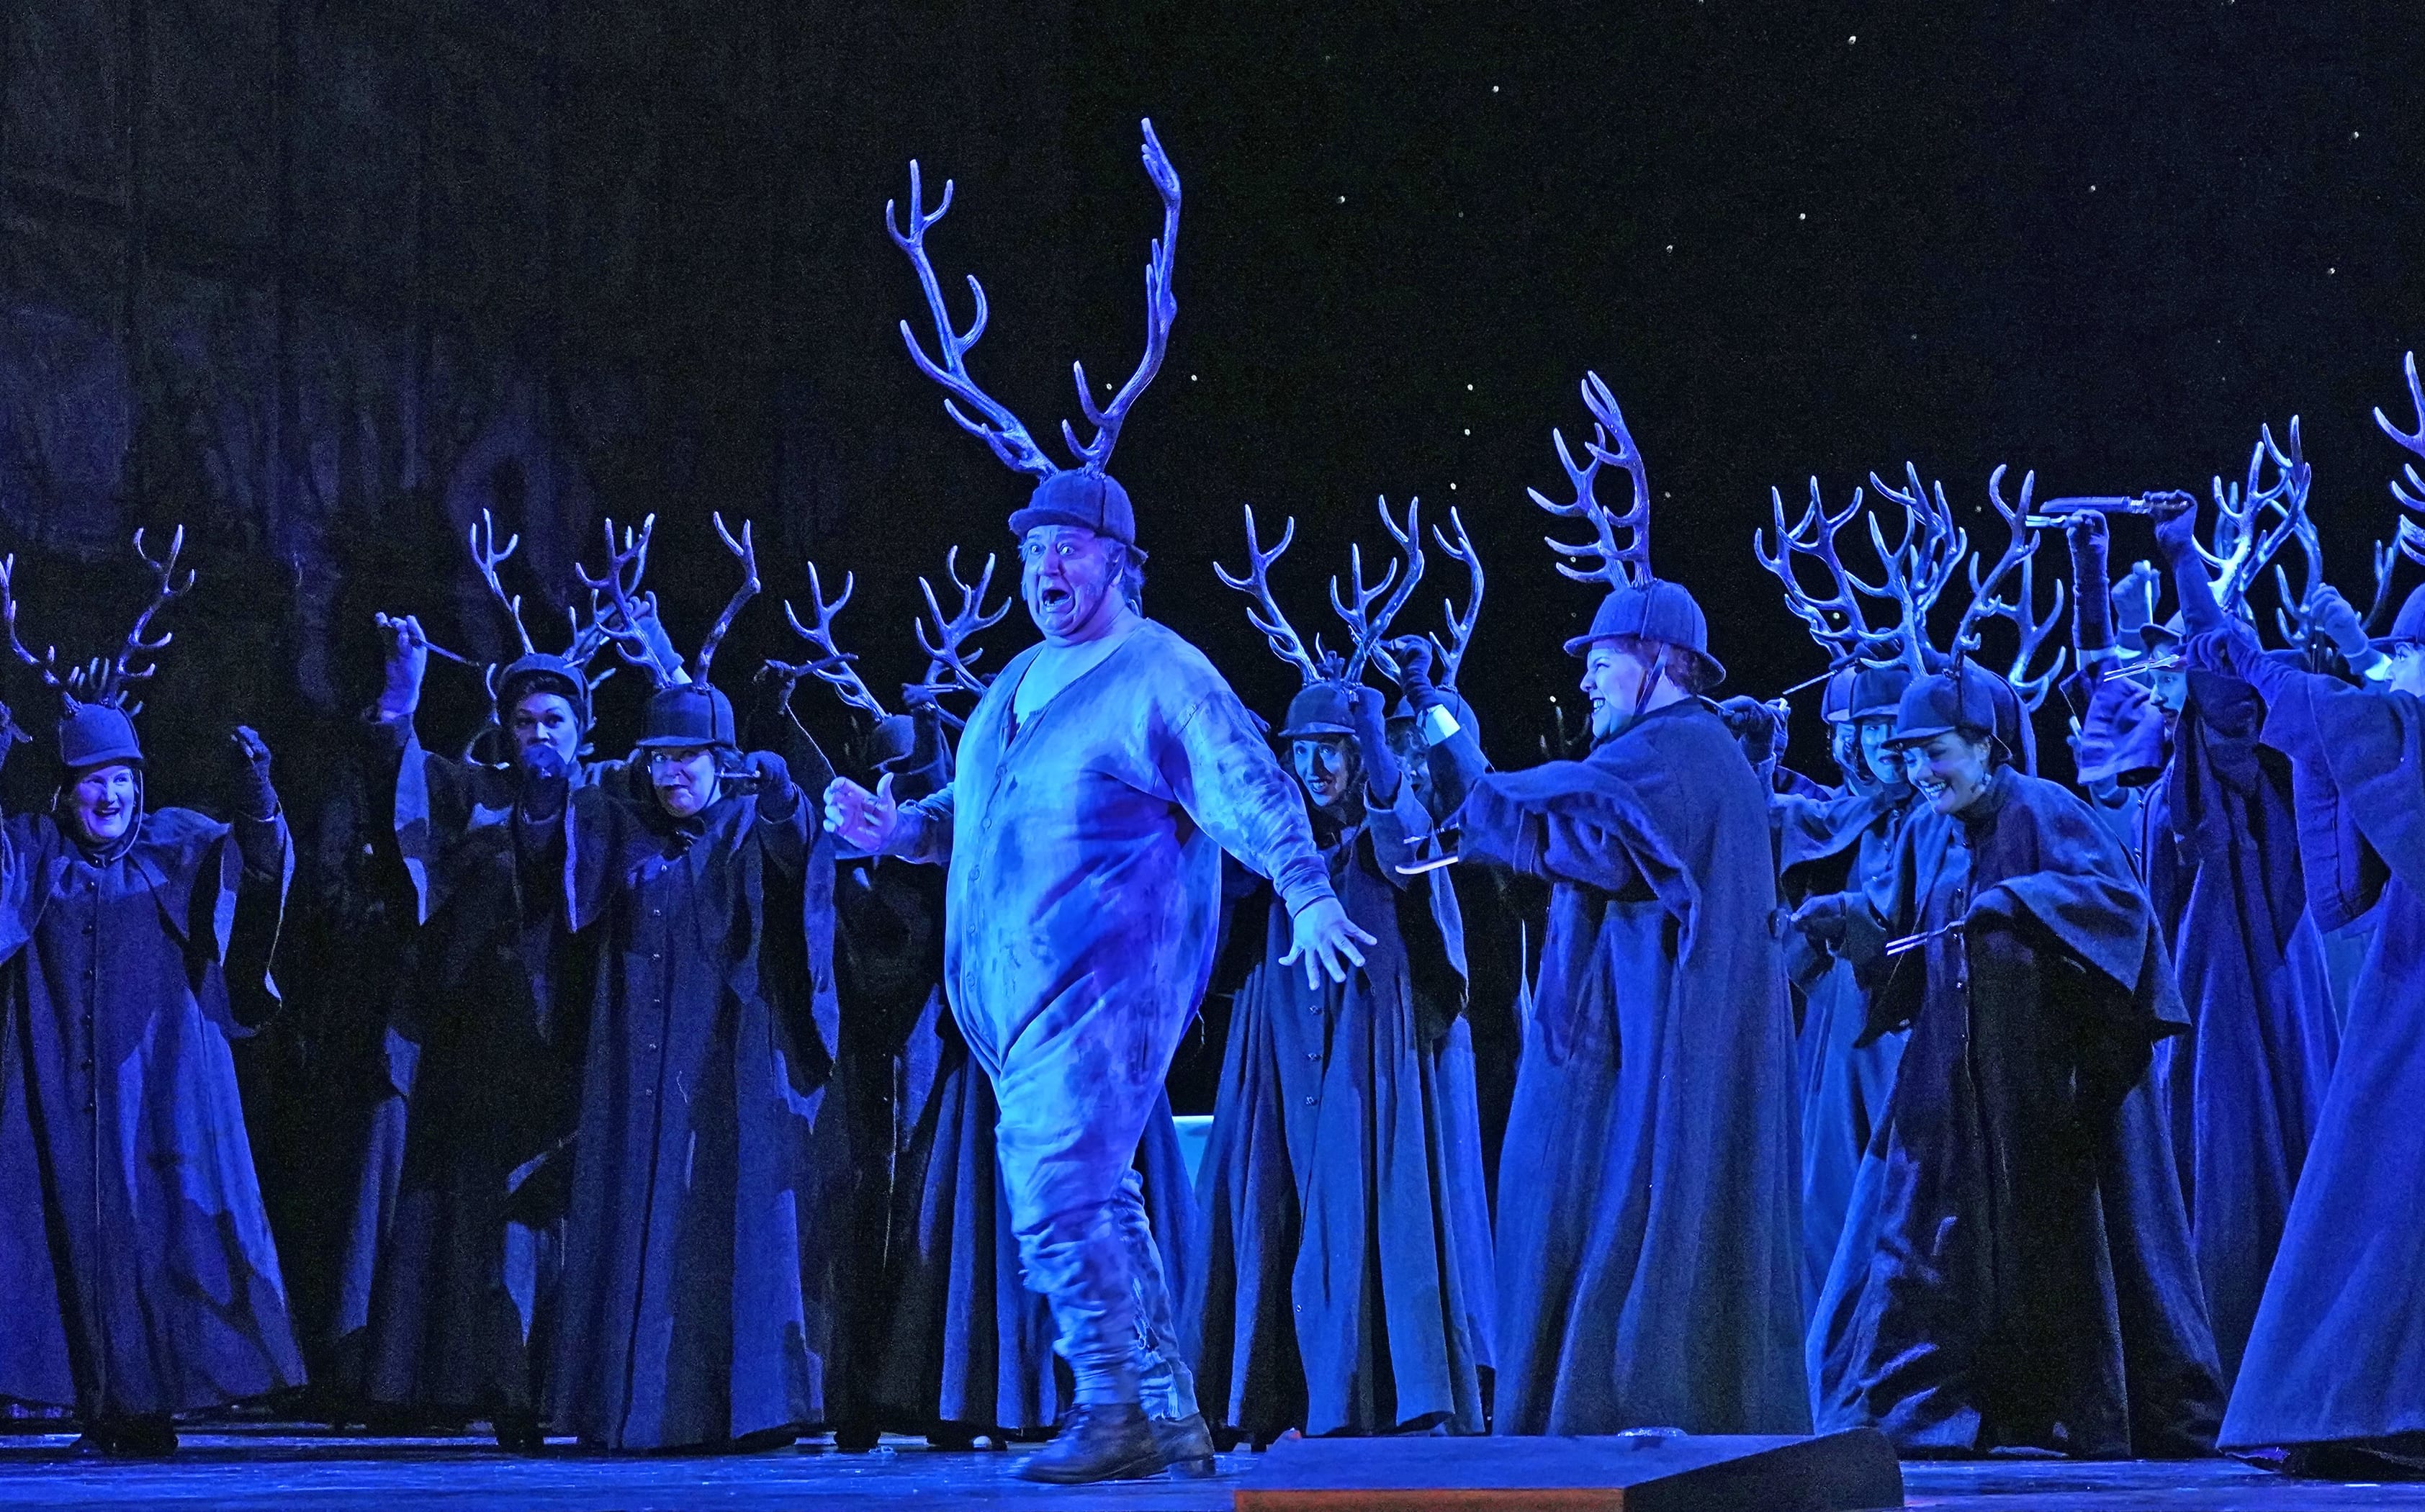 A scene from Act III of Falstaff at The Met